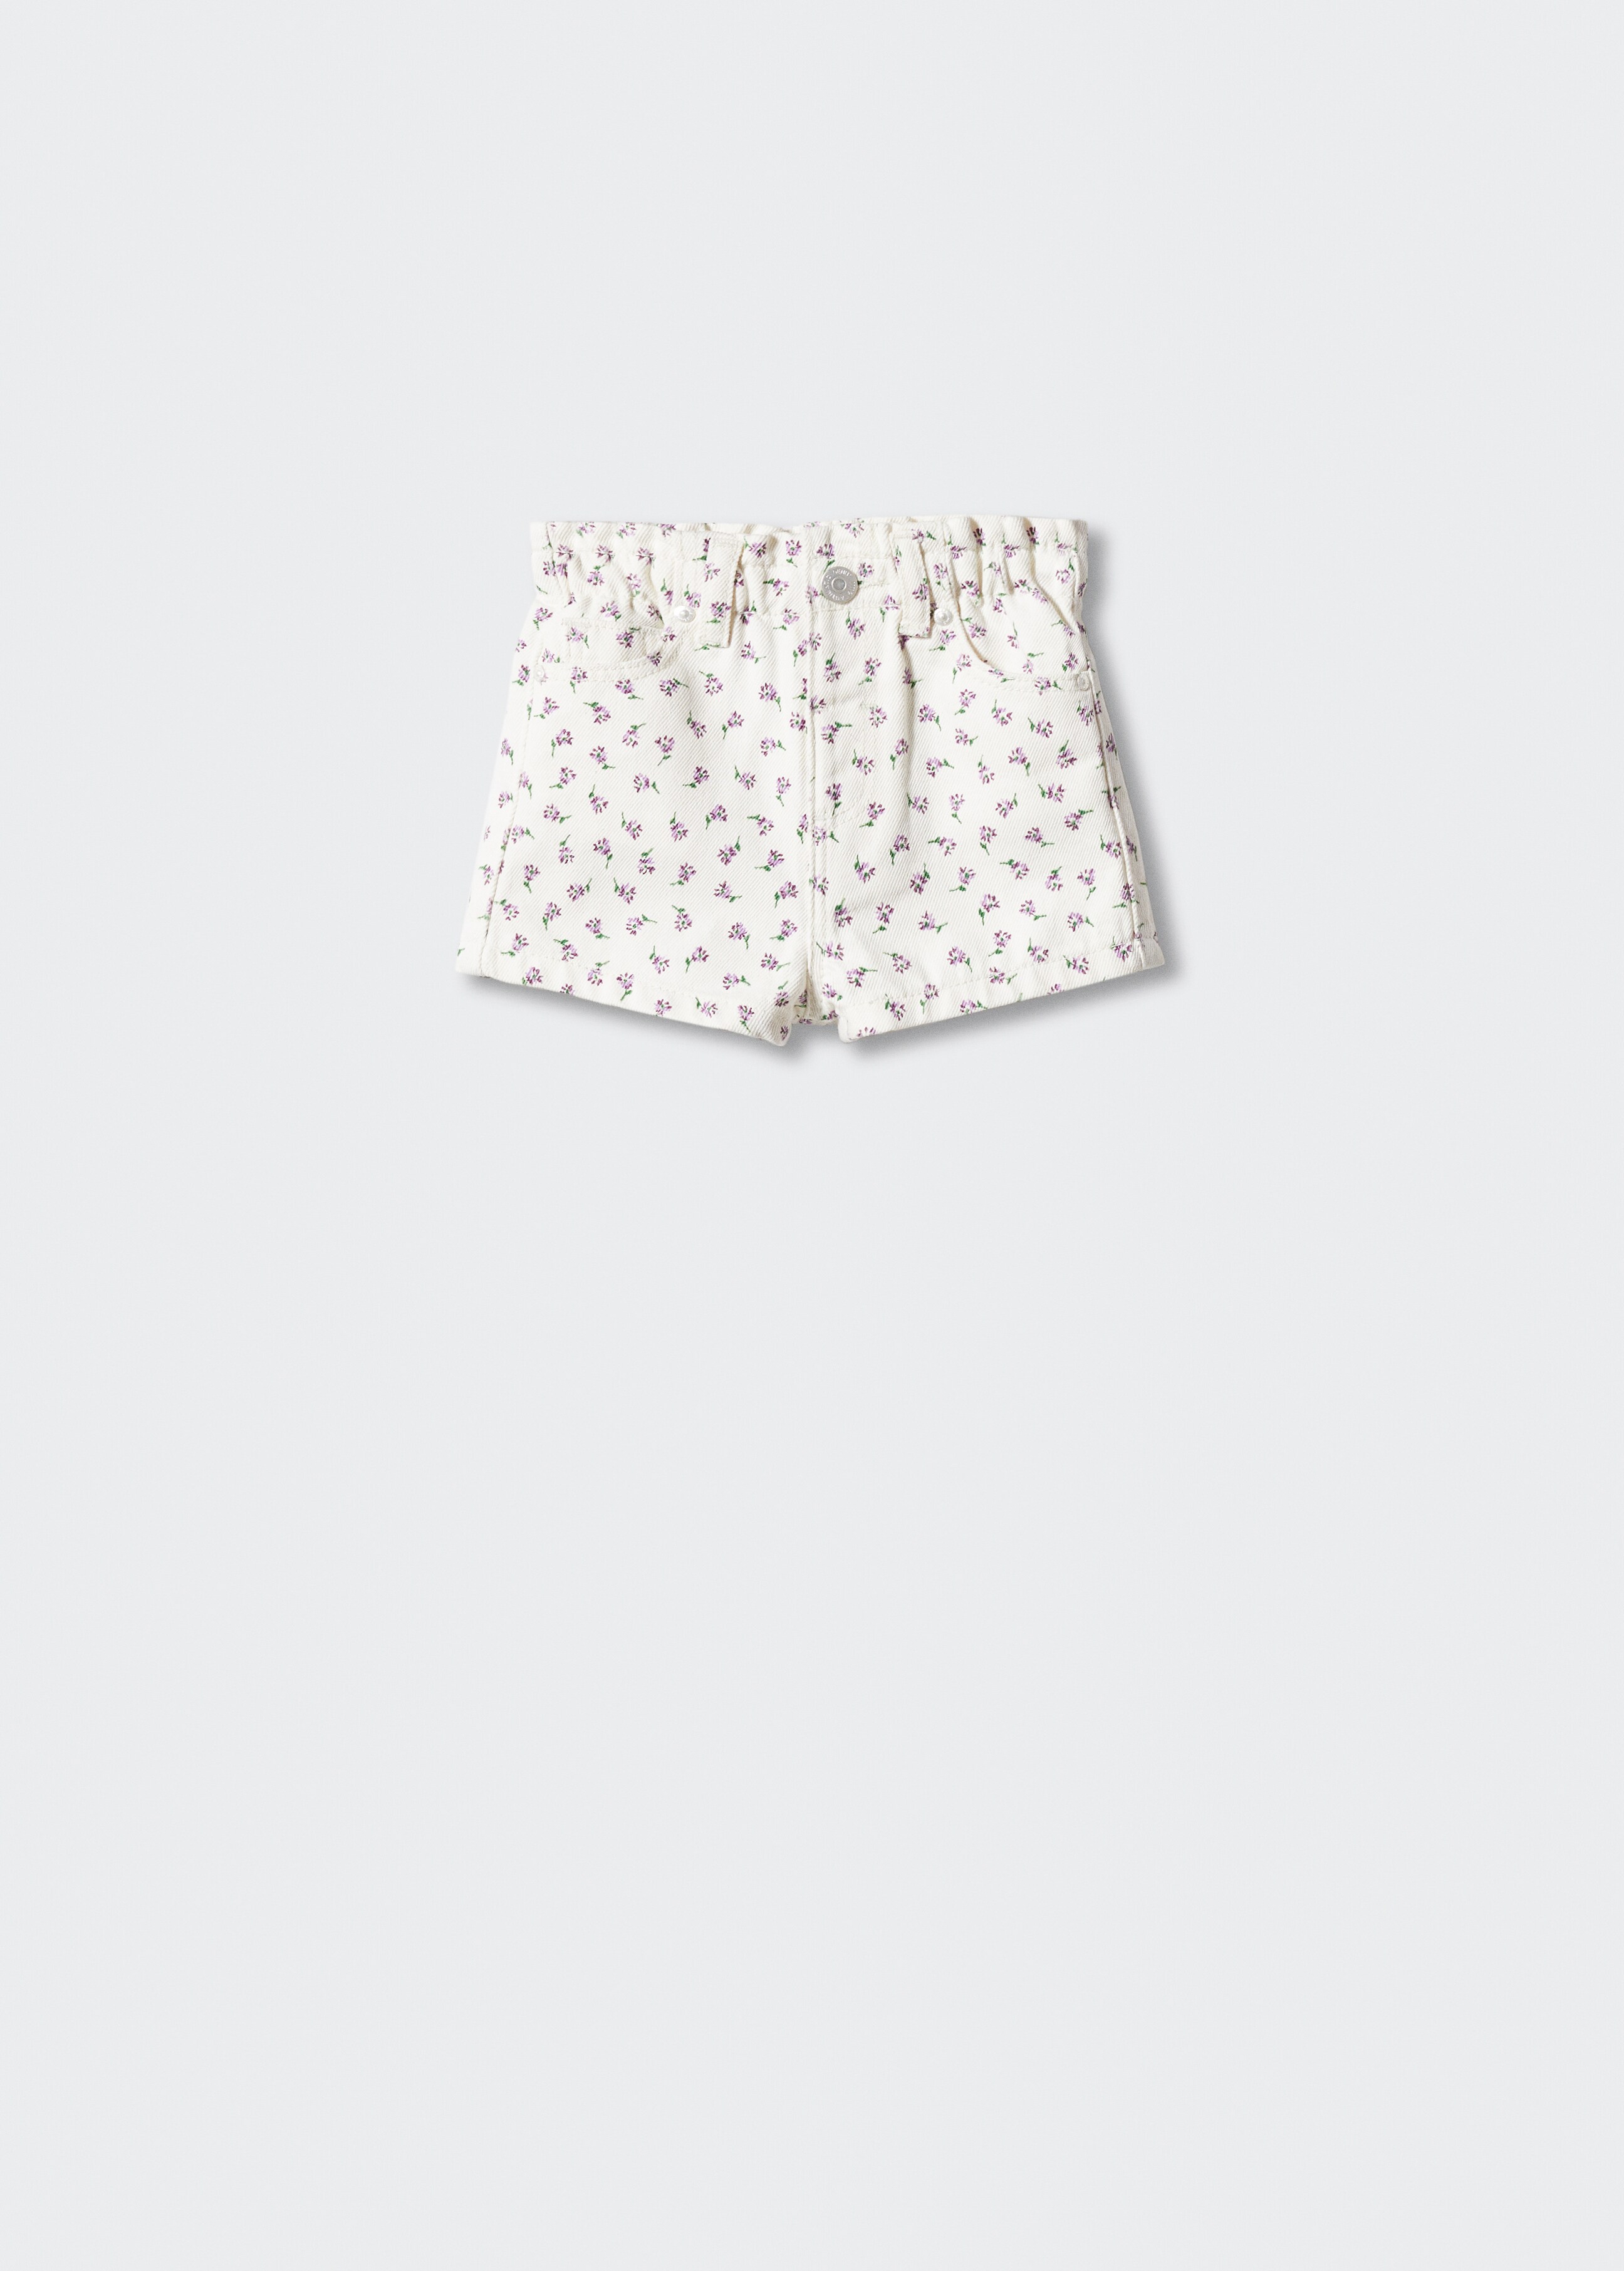 Printed cotton shorts - Article without model